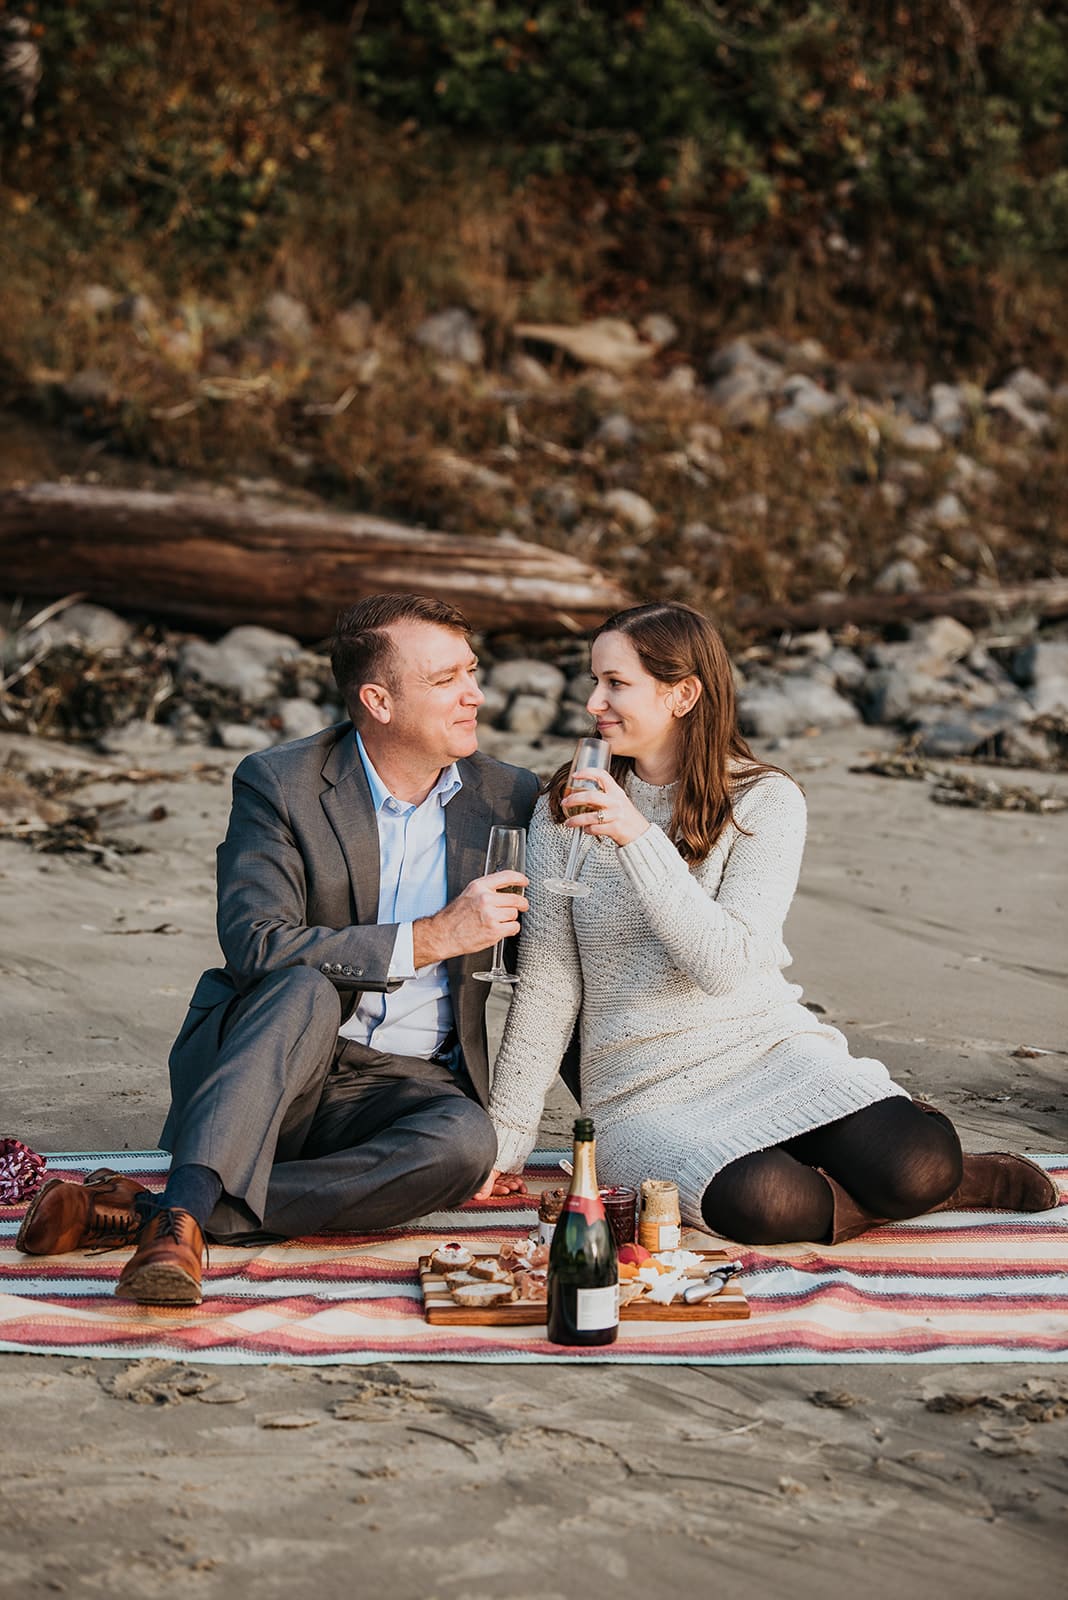 a man and woman sitting on the beach drinking wine